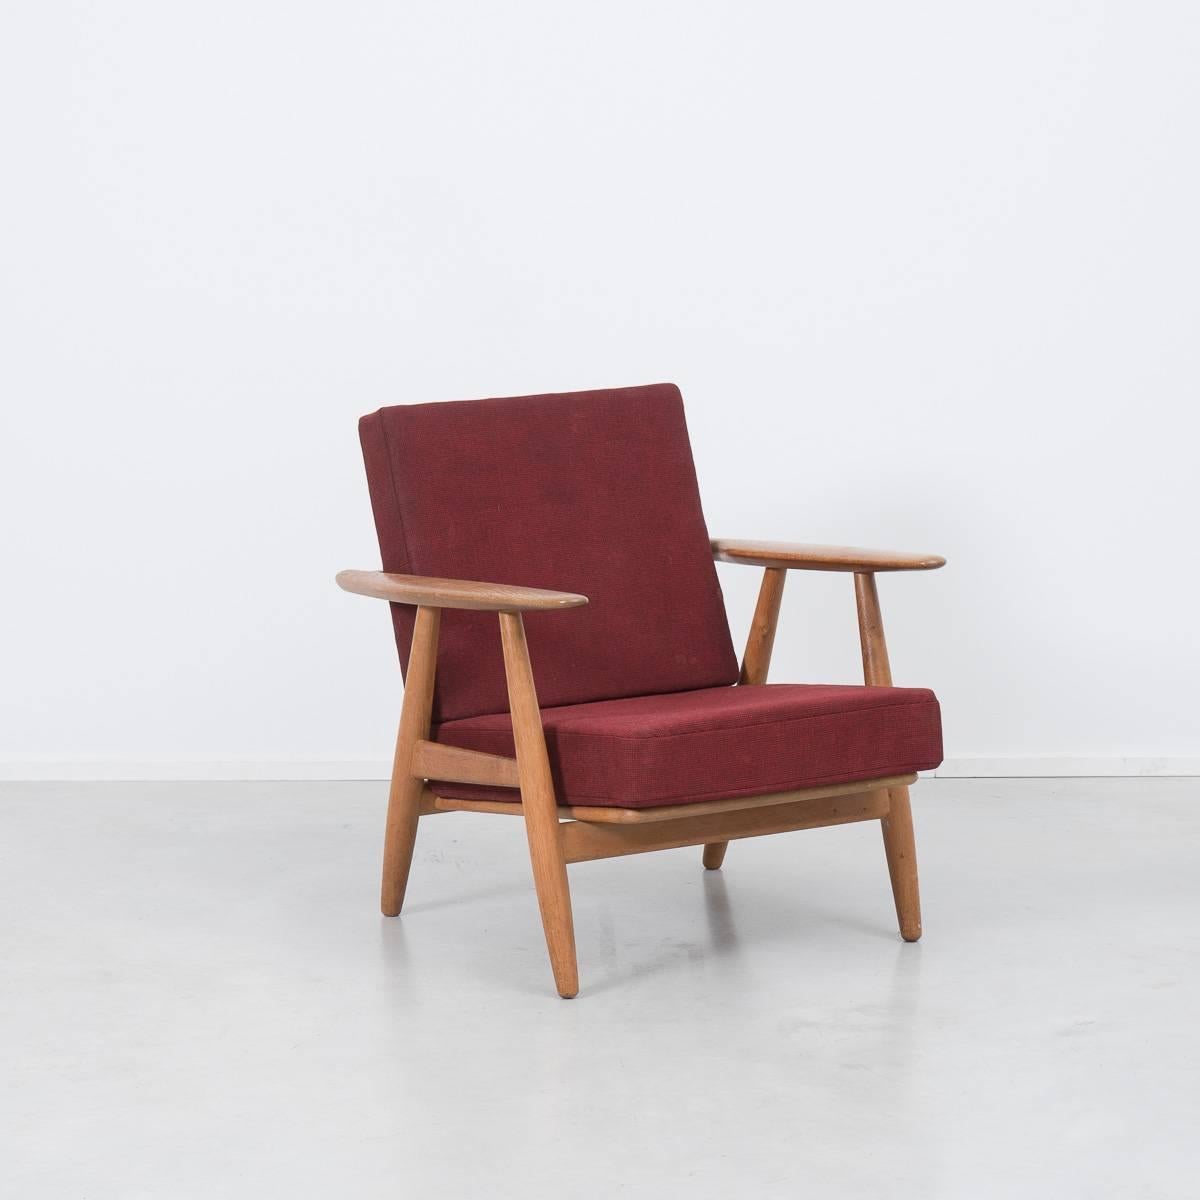 The cigar armchair in oak with loose cushions. The armchair was designed by Hans J. Wegner (1917-2007) in 1954 for GETAMA, Denmark. The chair is model GE 240 but is better known as The Cigar (cigaren). Extremely comfortable original sprung